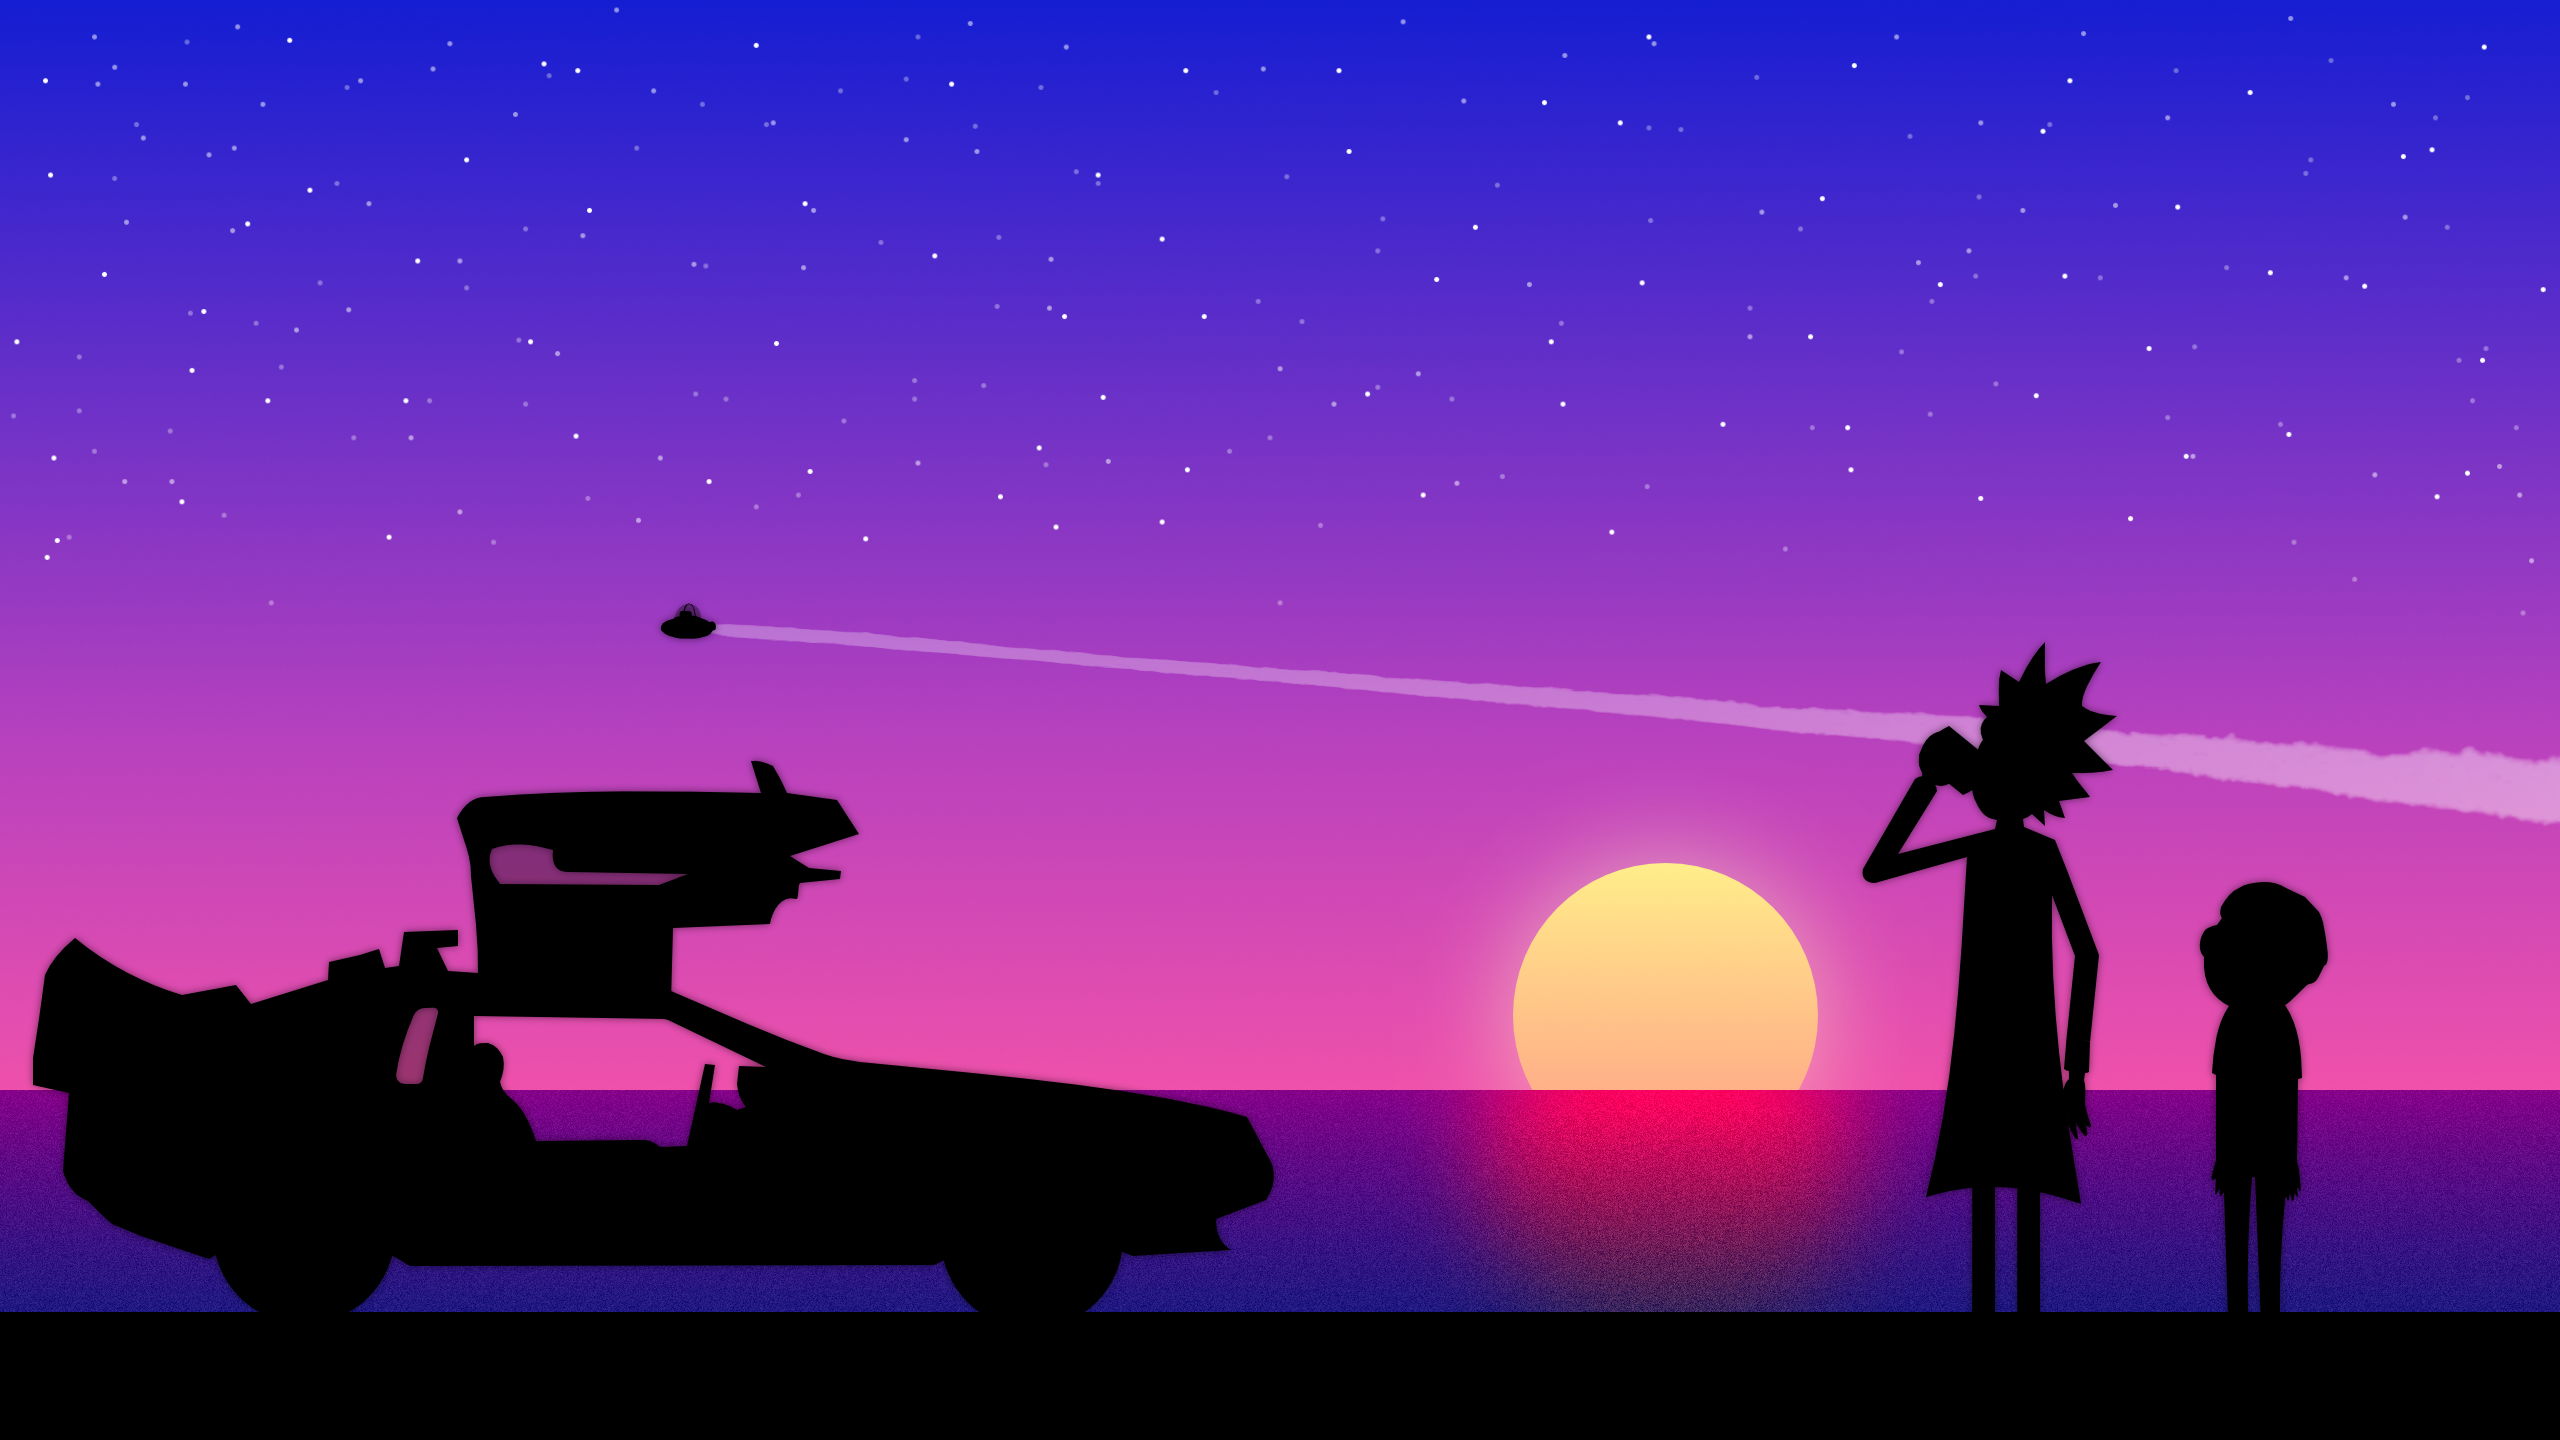 Caricature Rick And Morty Car DeLorean Time Machine Sunset Silhouette Wallpaper:2560x1440